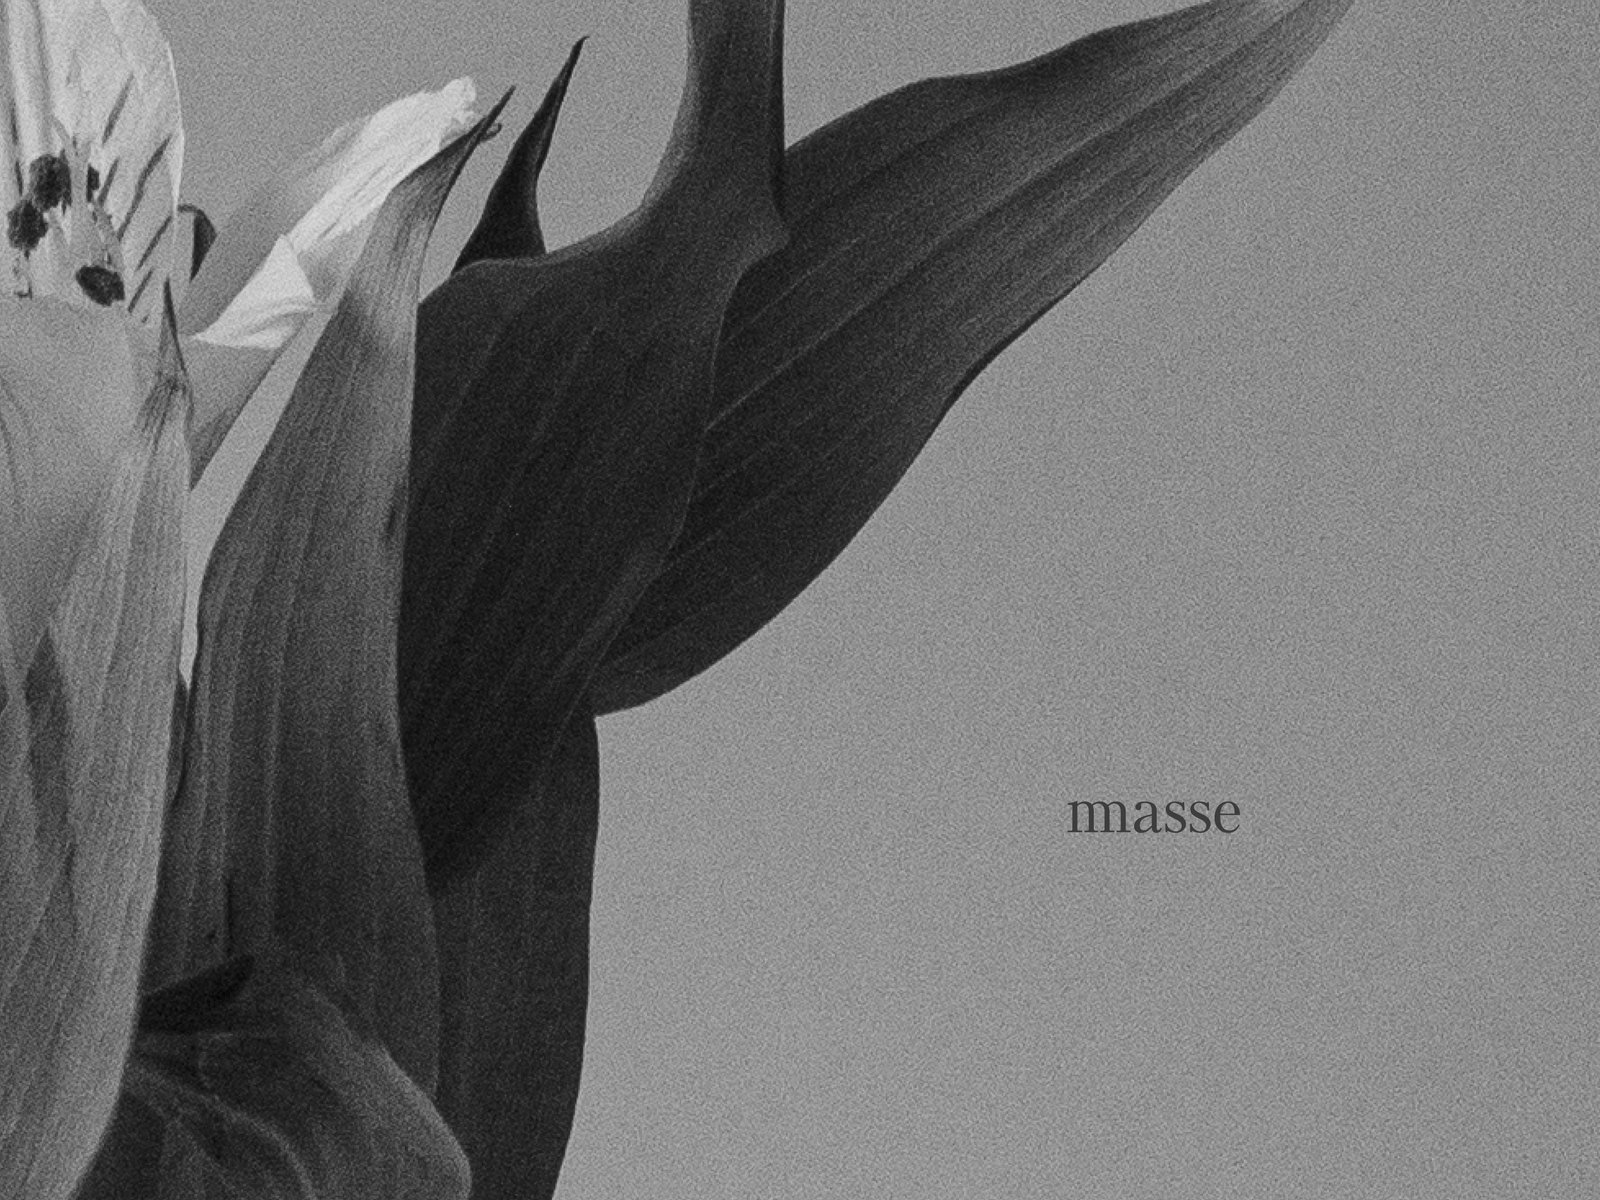 A greyscale close up of an alstroemeria with a logotype that says "masse". The image is grainy and noisy, but minimalistic. by Sydney SG